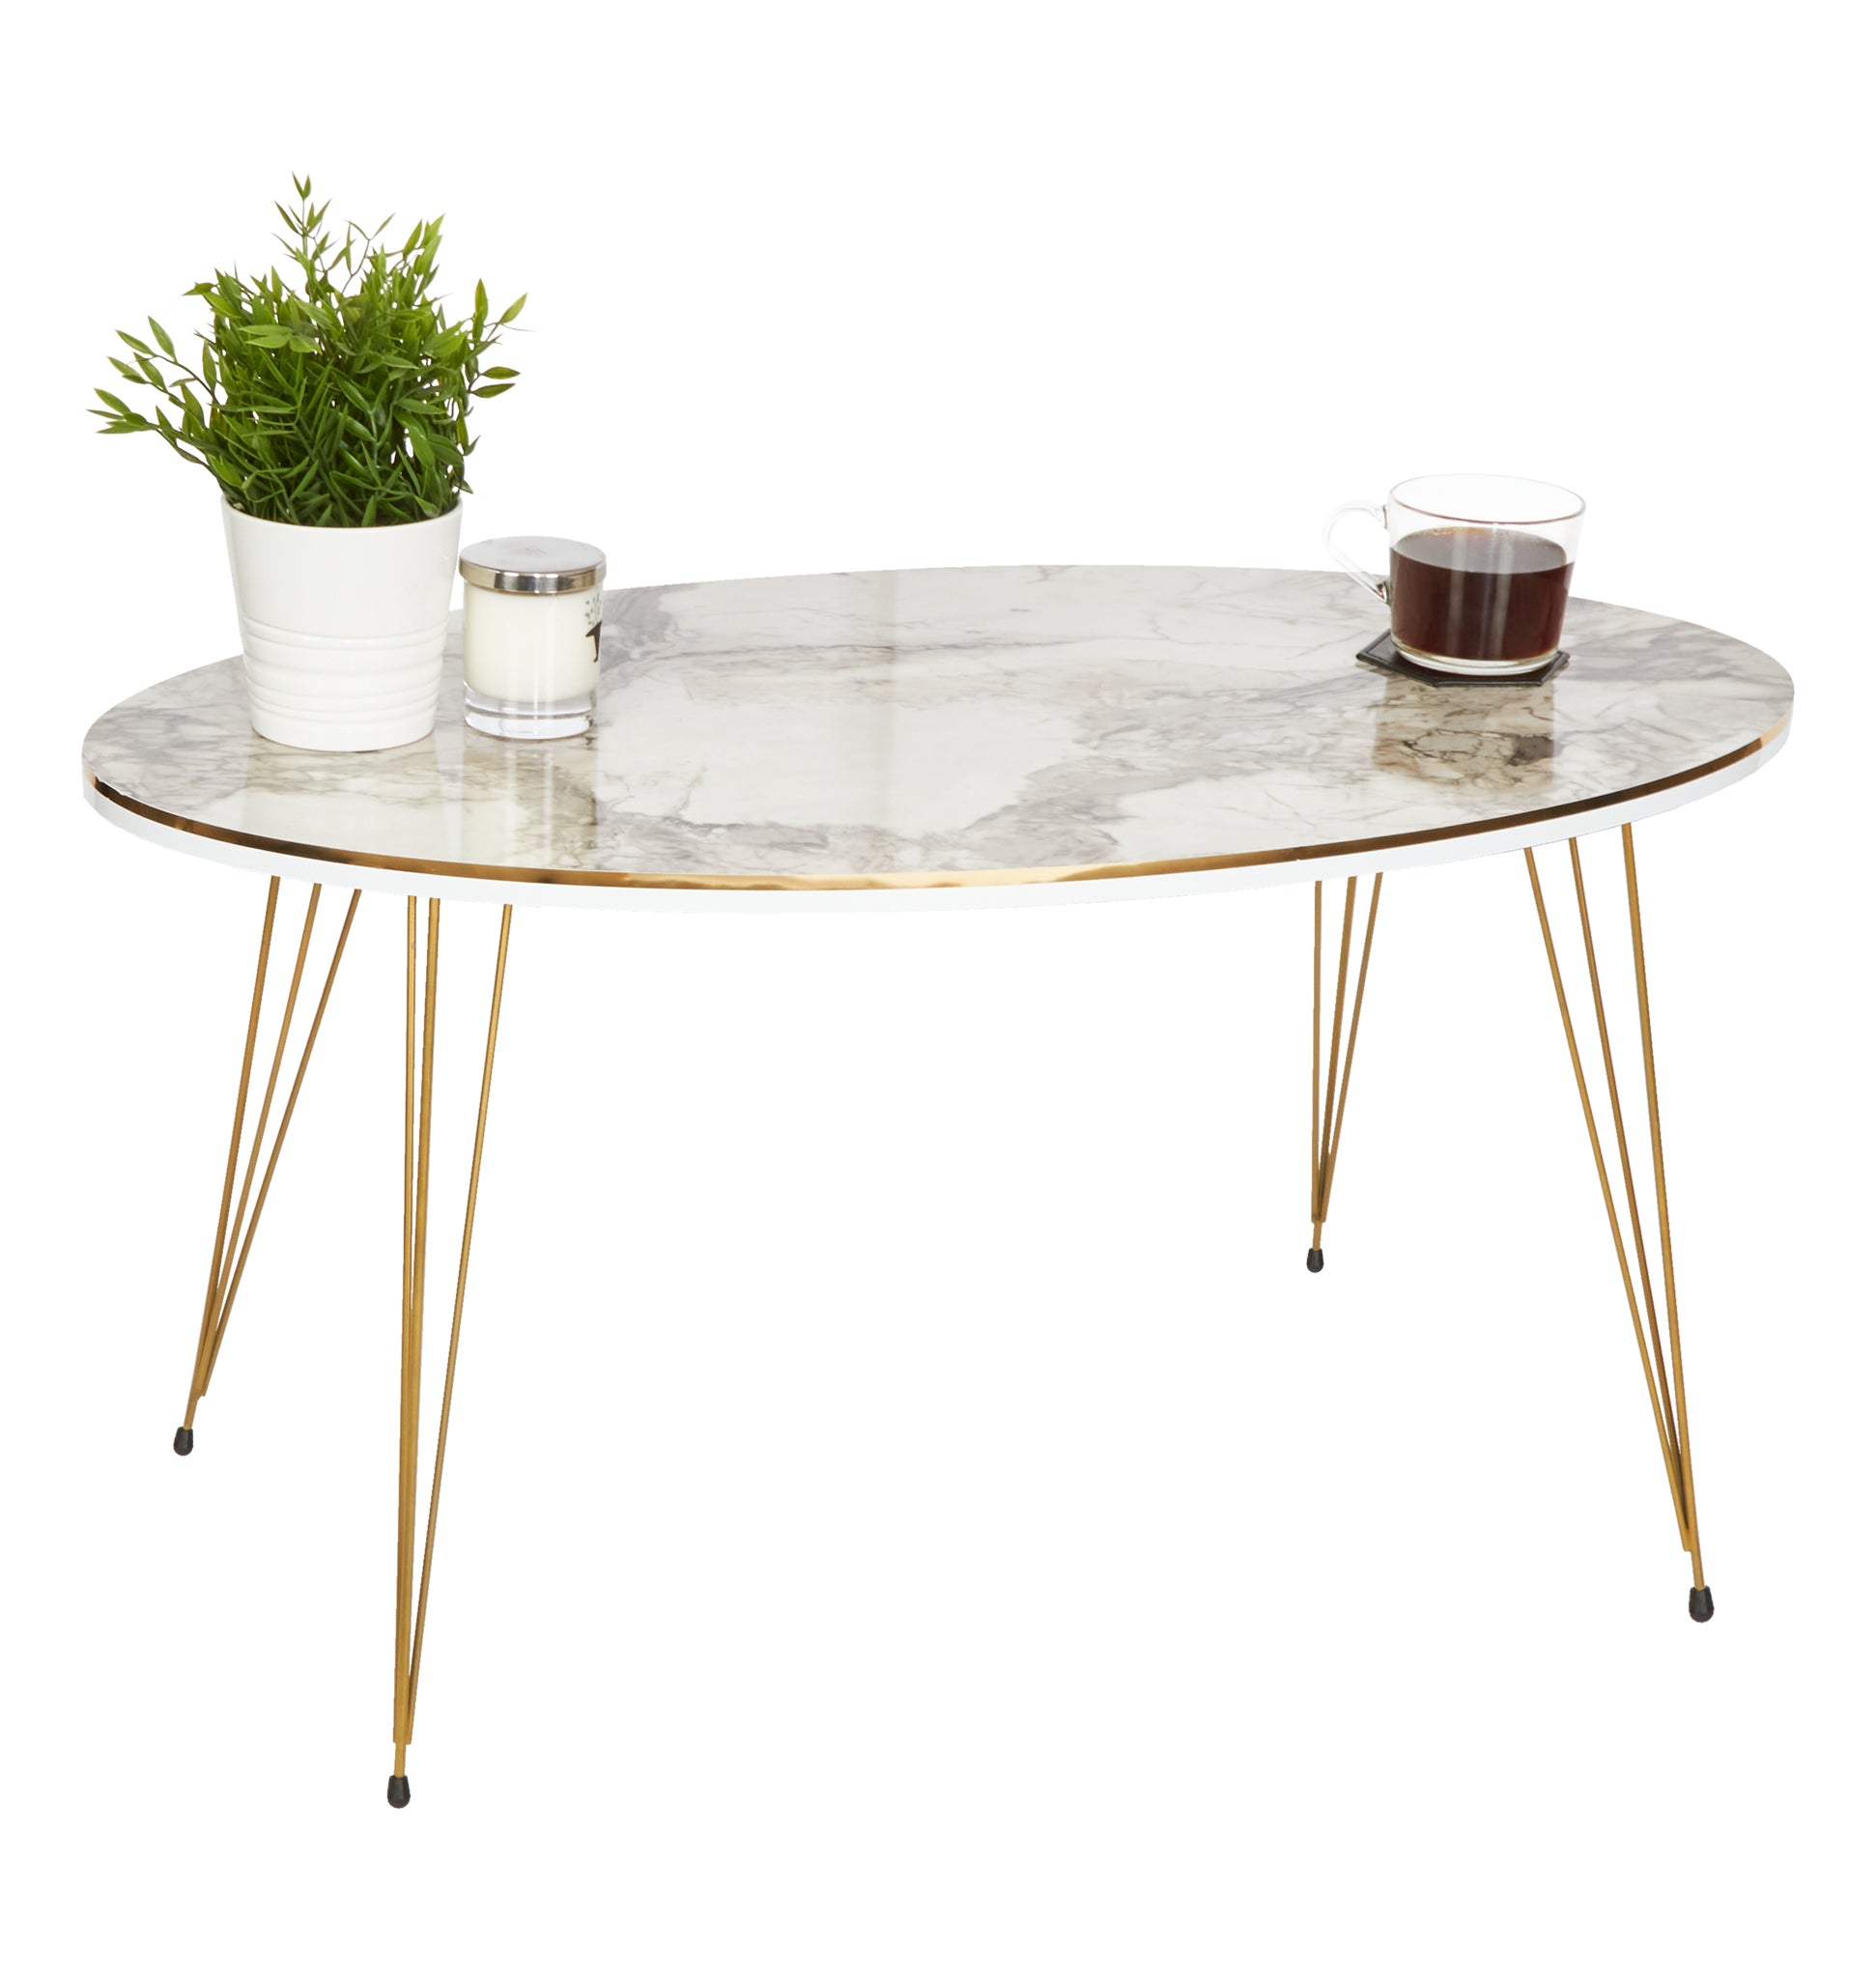 Ellipse Coffee Table & Set of 3 Side tables - Gold & White Marble